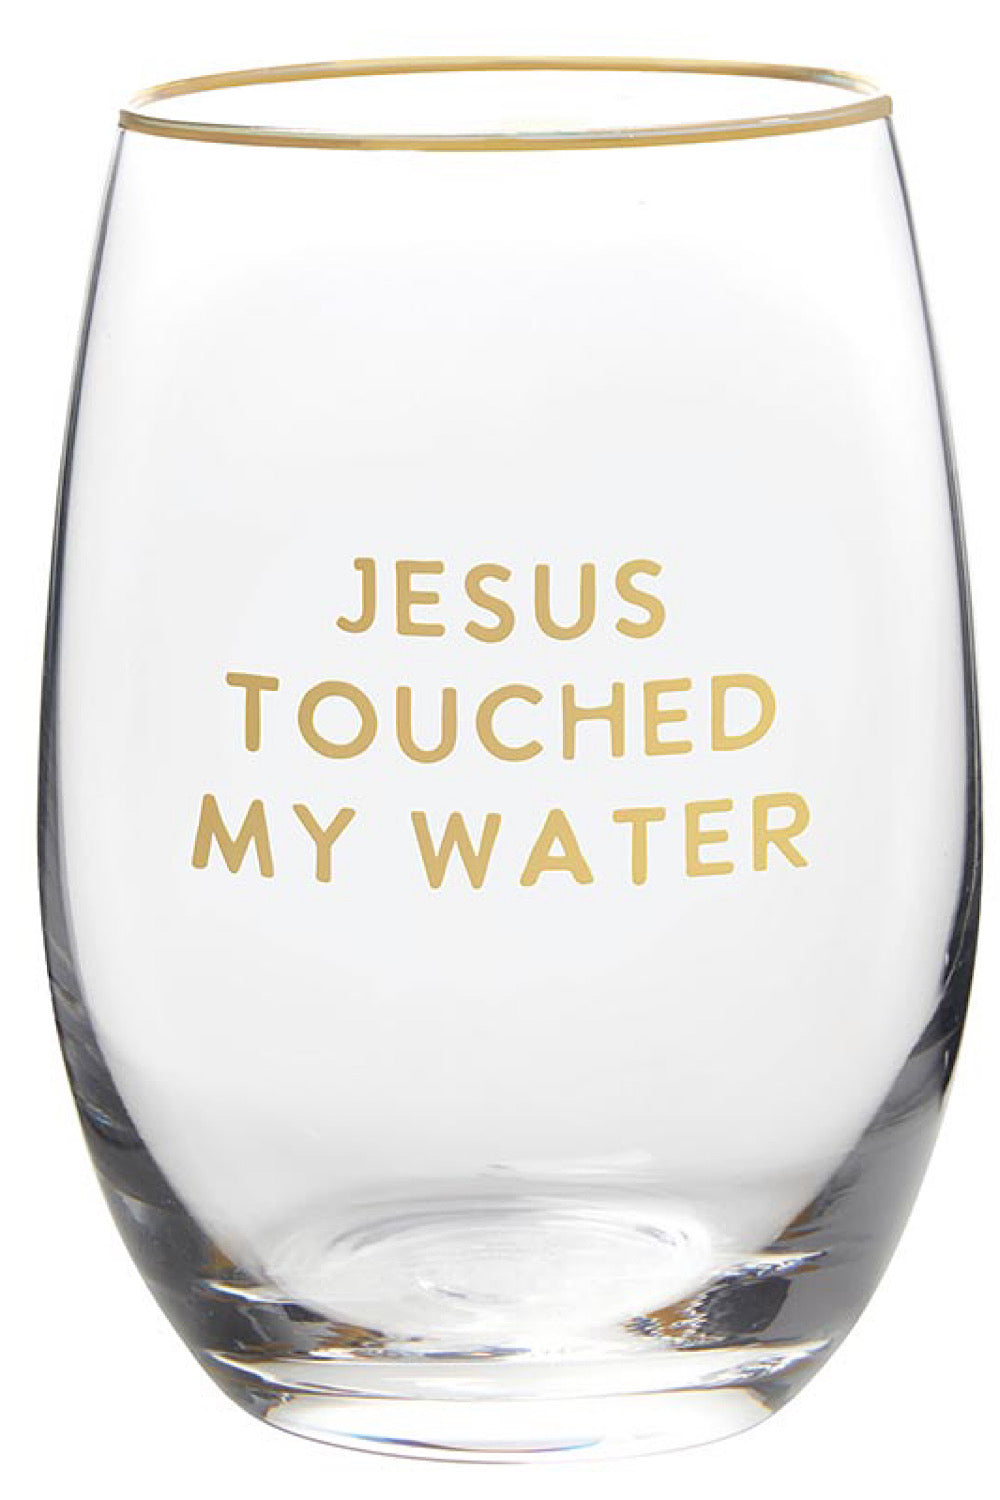 JESUS TOUCHED MY WATER WINE GLASS